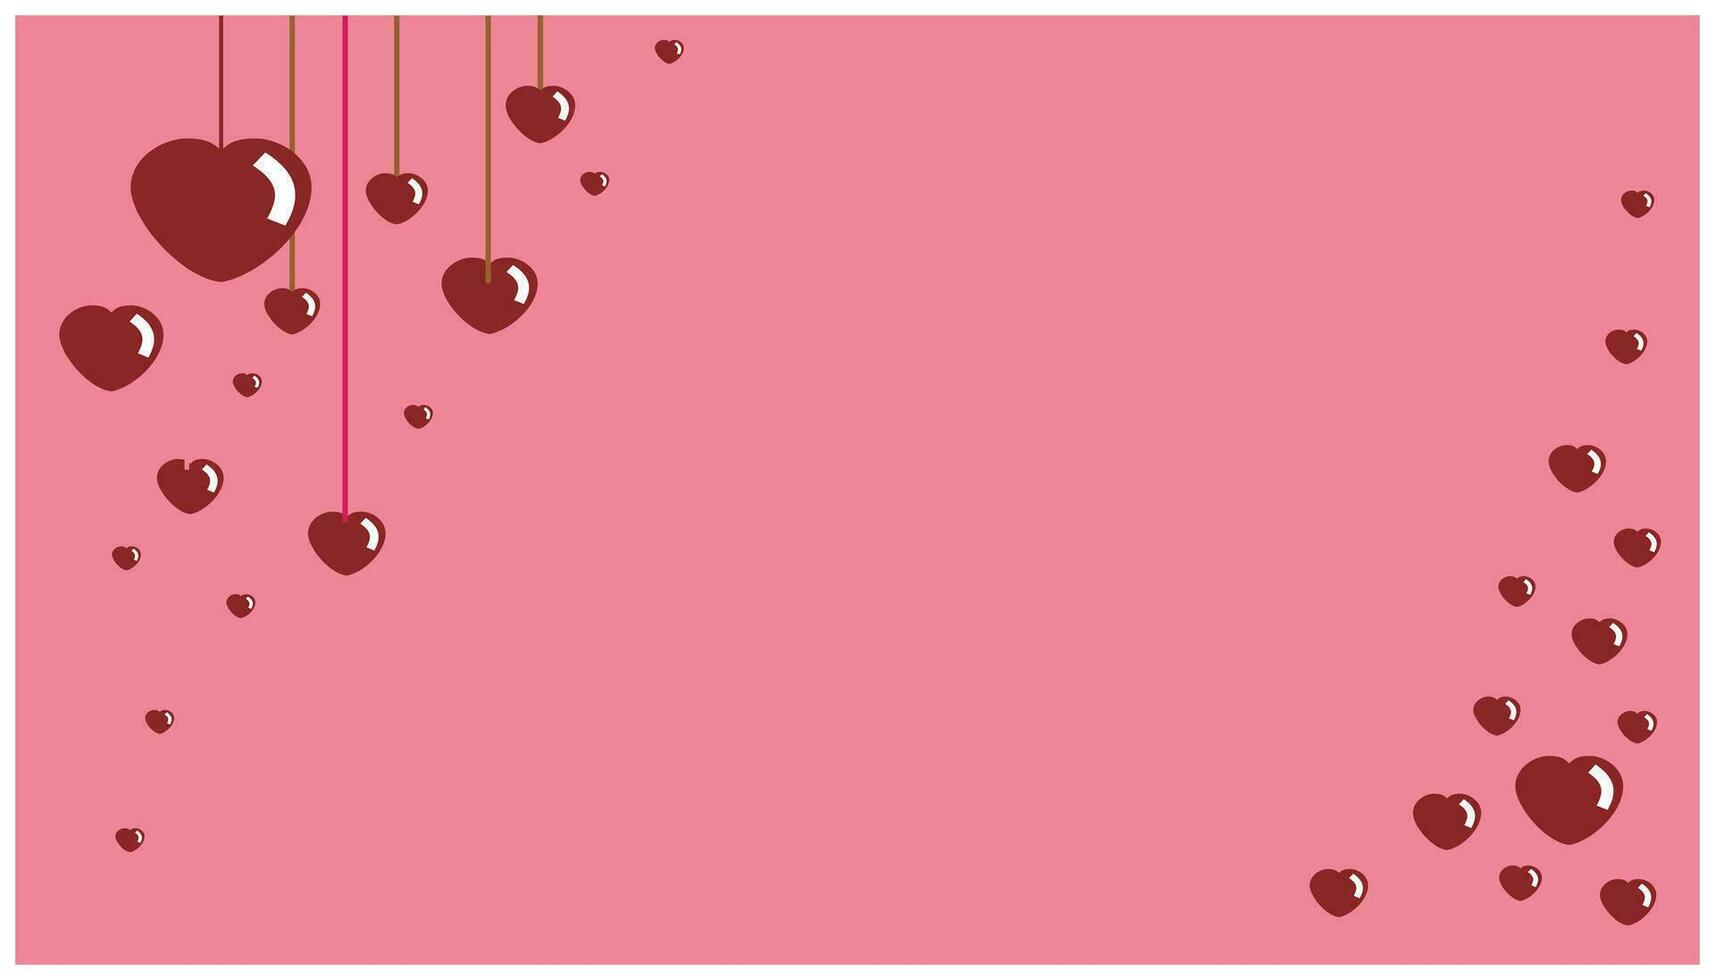 Valentine's day background with red hearts. Vector illustration. Valentine's day card design full of love for greeting card designs, posters, banners. Design elements of love